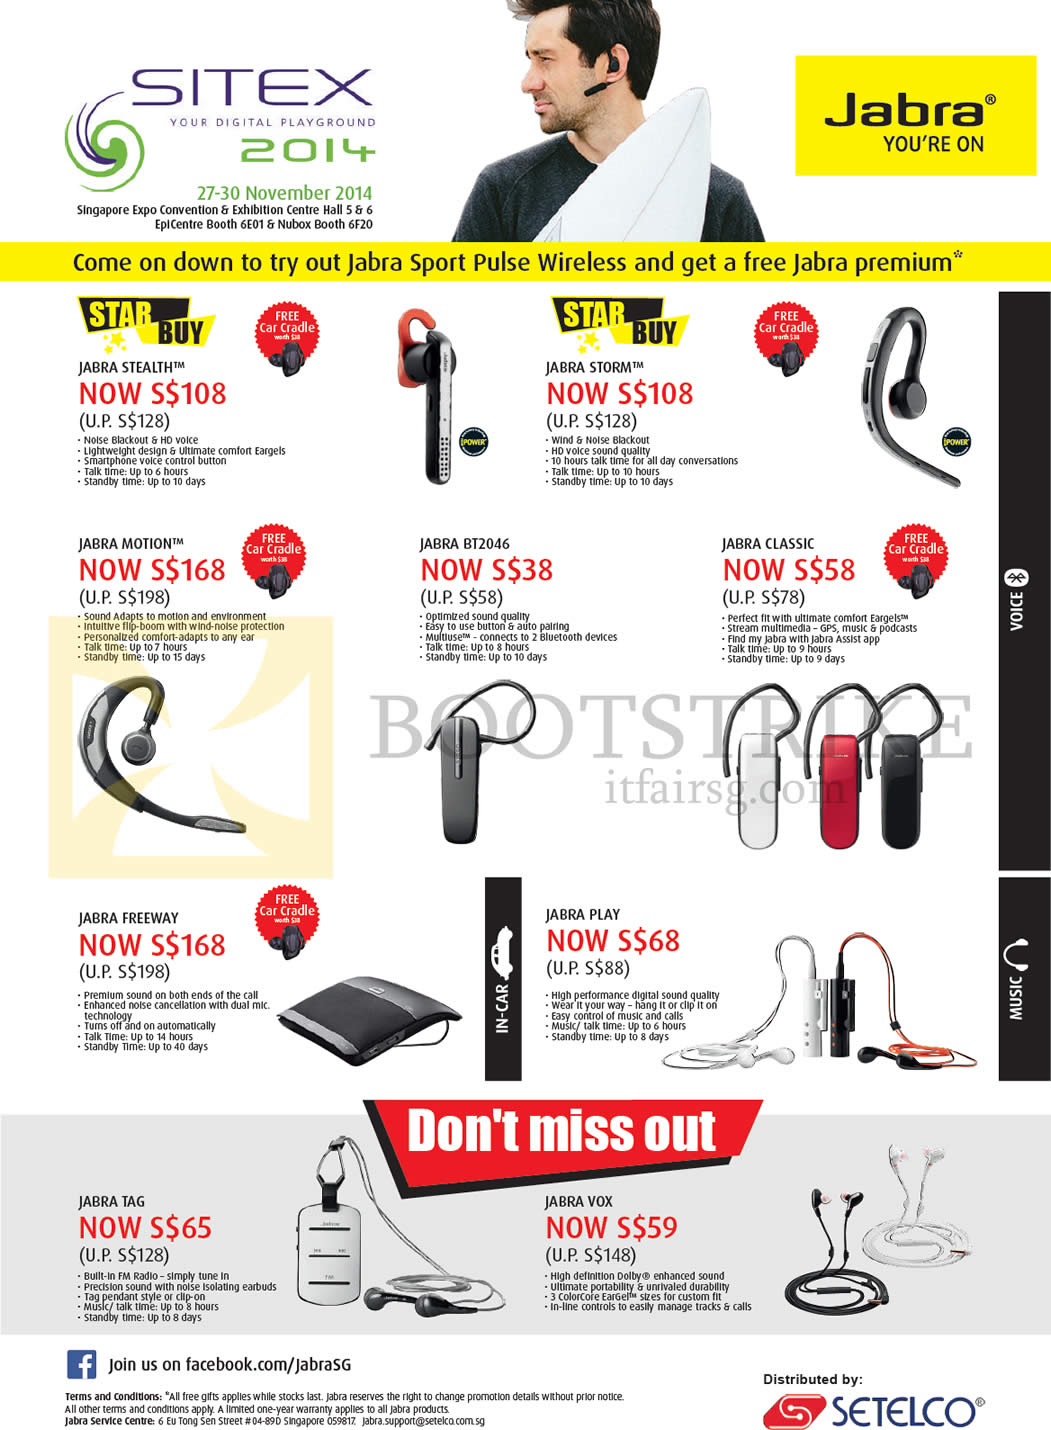 SITEX 2014 price list image brochure of Jabra Bluetooth Headsets, Car Speaker, Stealth, Motion, Storm, Classic, BT2046, Freeway, Play, Tag, Vox